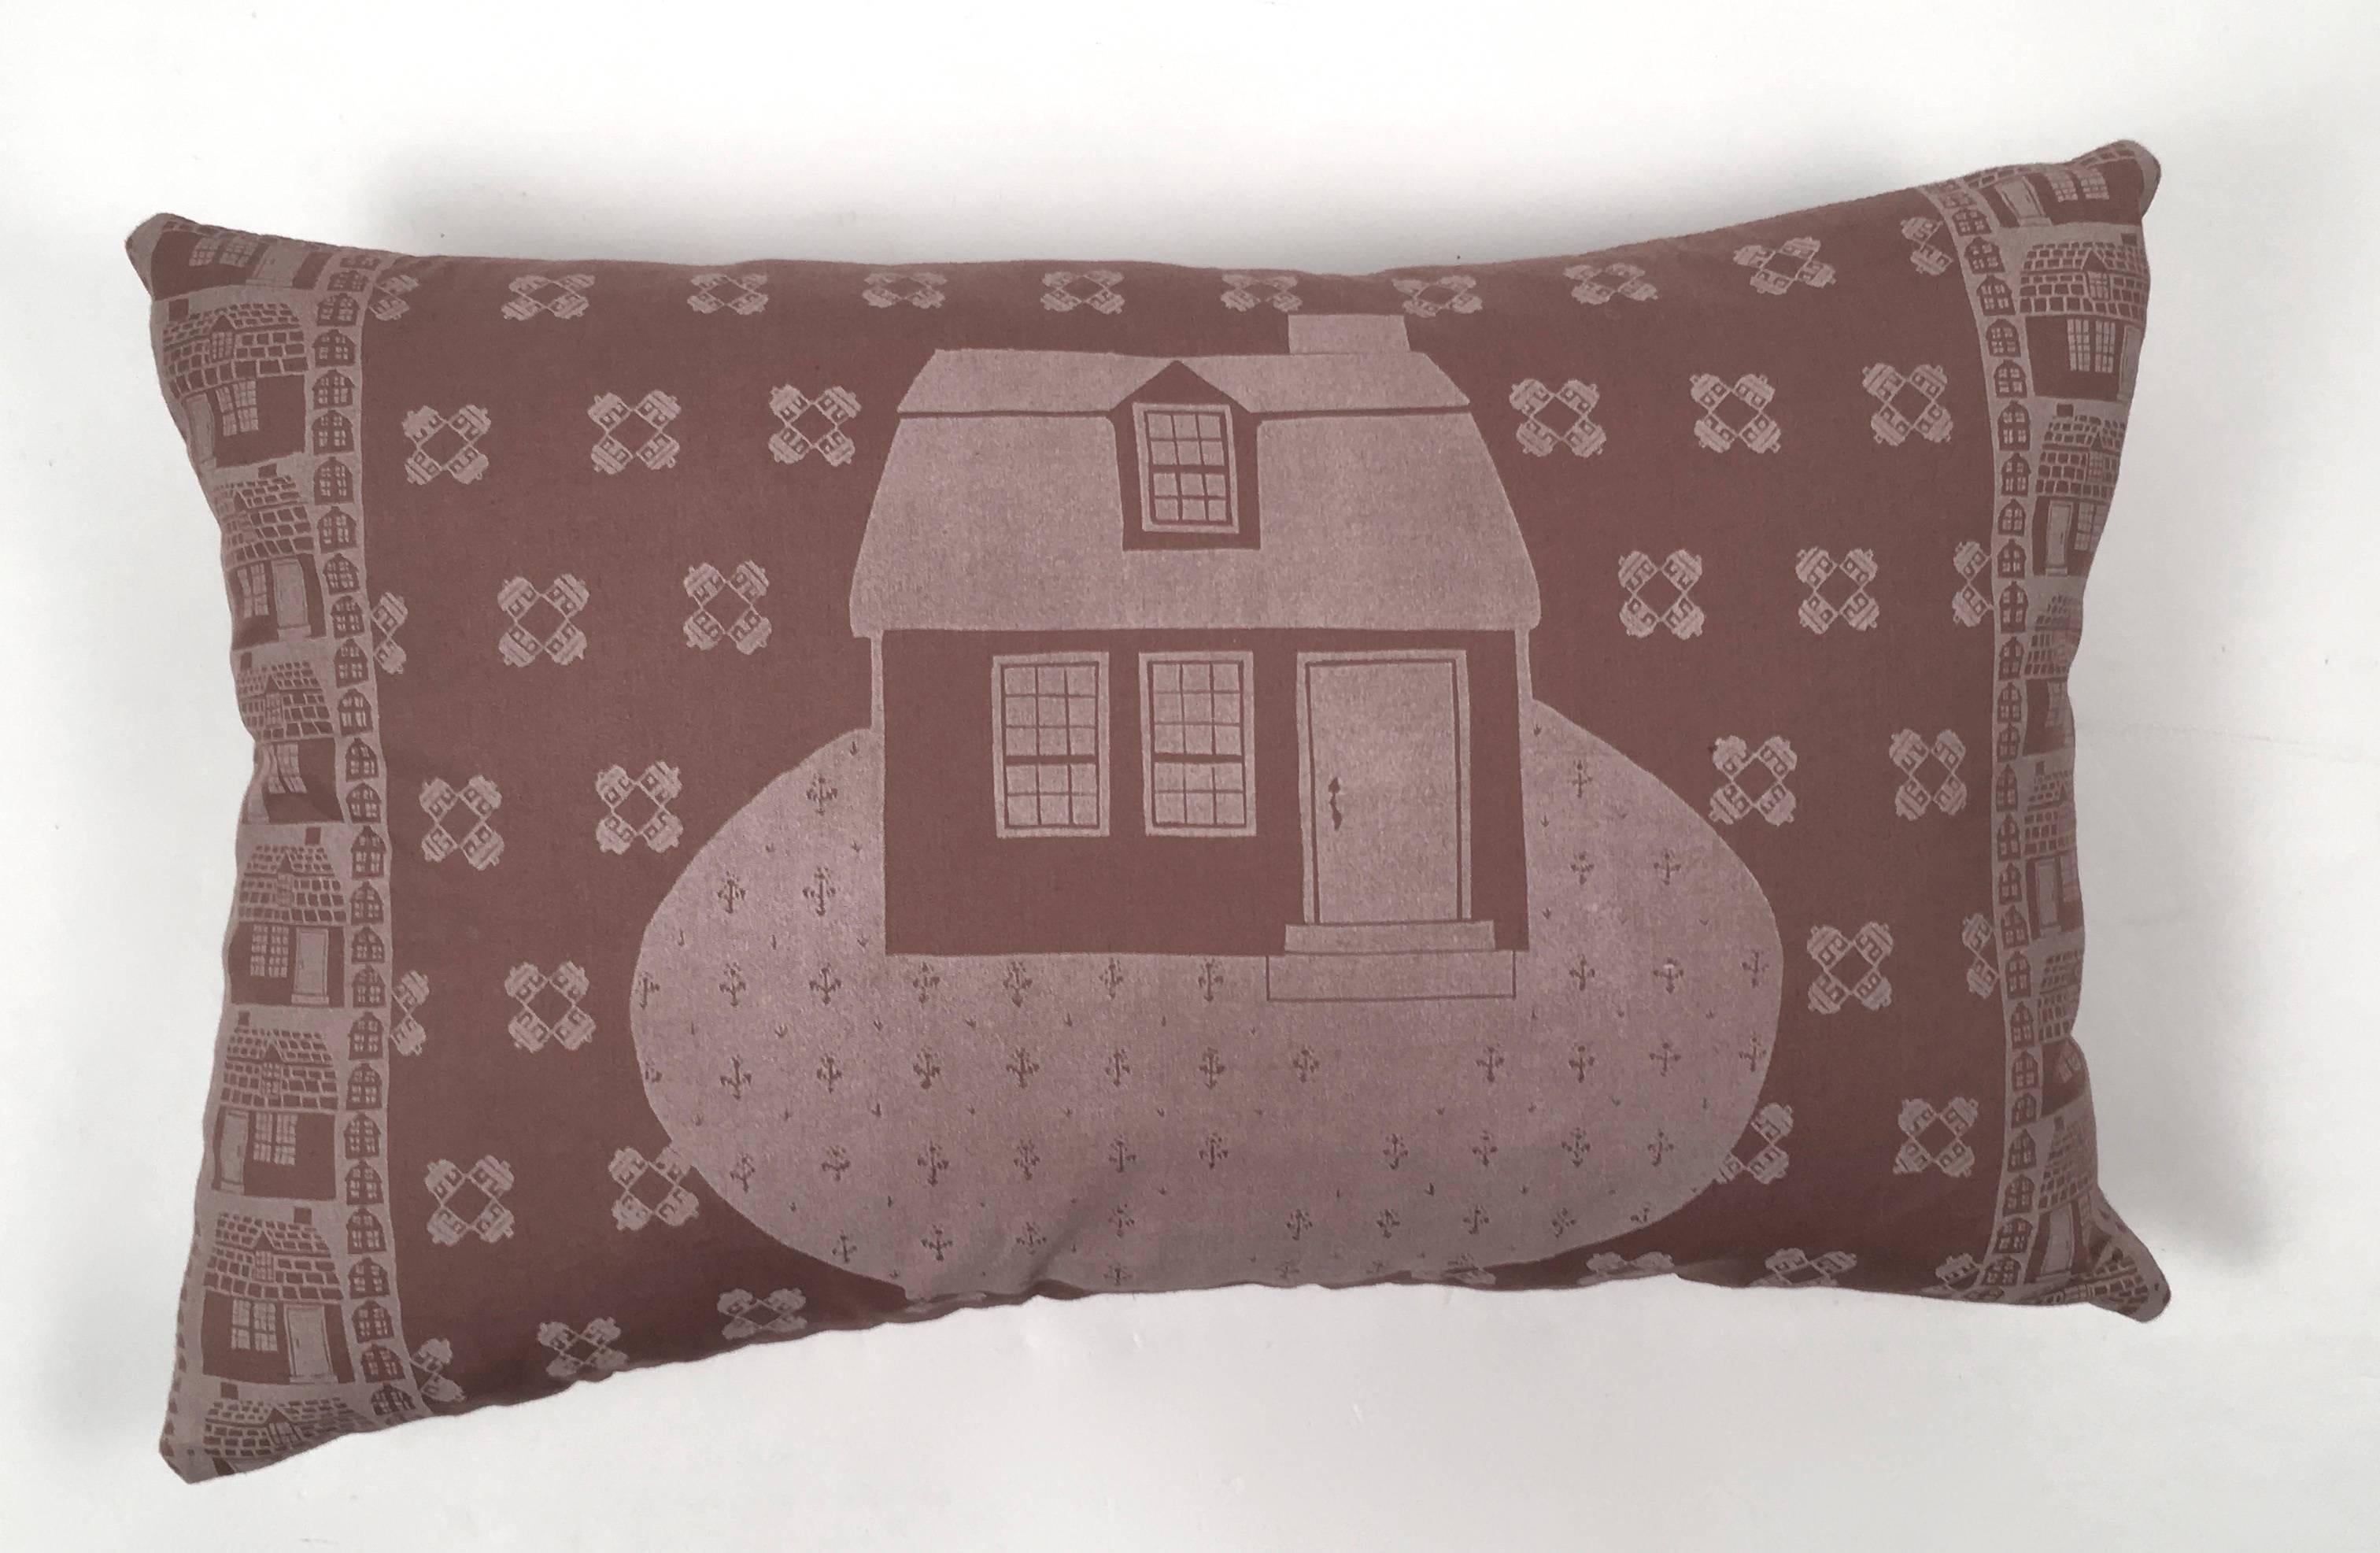 Original hand block printed Folly Cove designers fabric pillow ) in white on mocha colored cotton, with new down filling and linen backing in the Story and a Half pattern, designed by Peggy Norton, circa 1958, which shows a charming cottage with